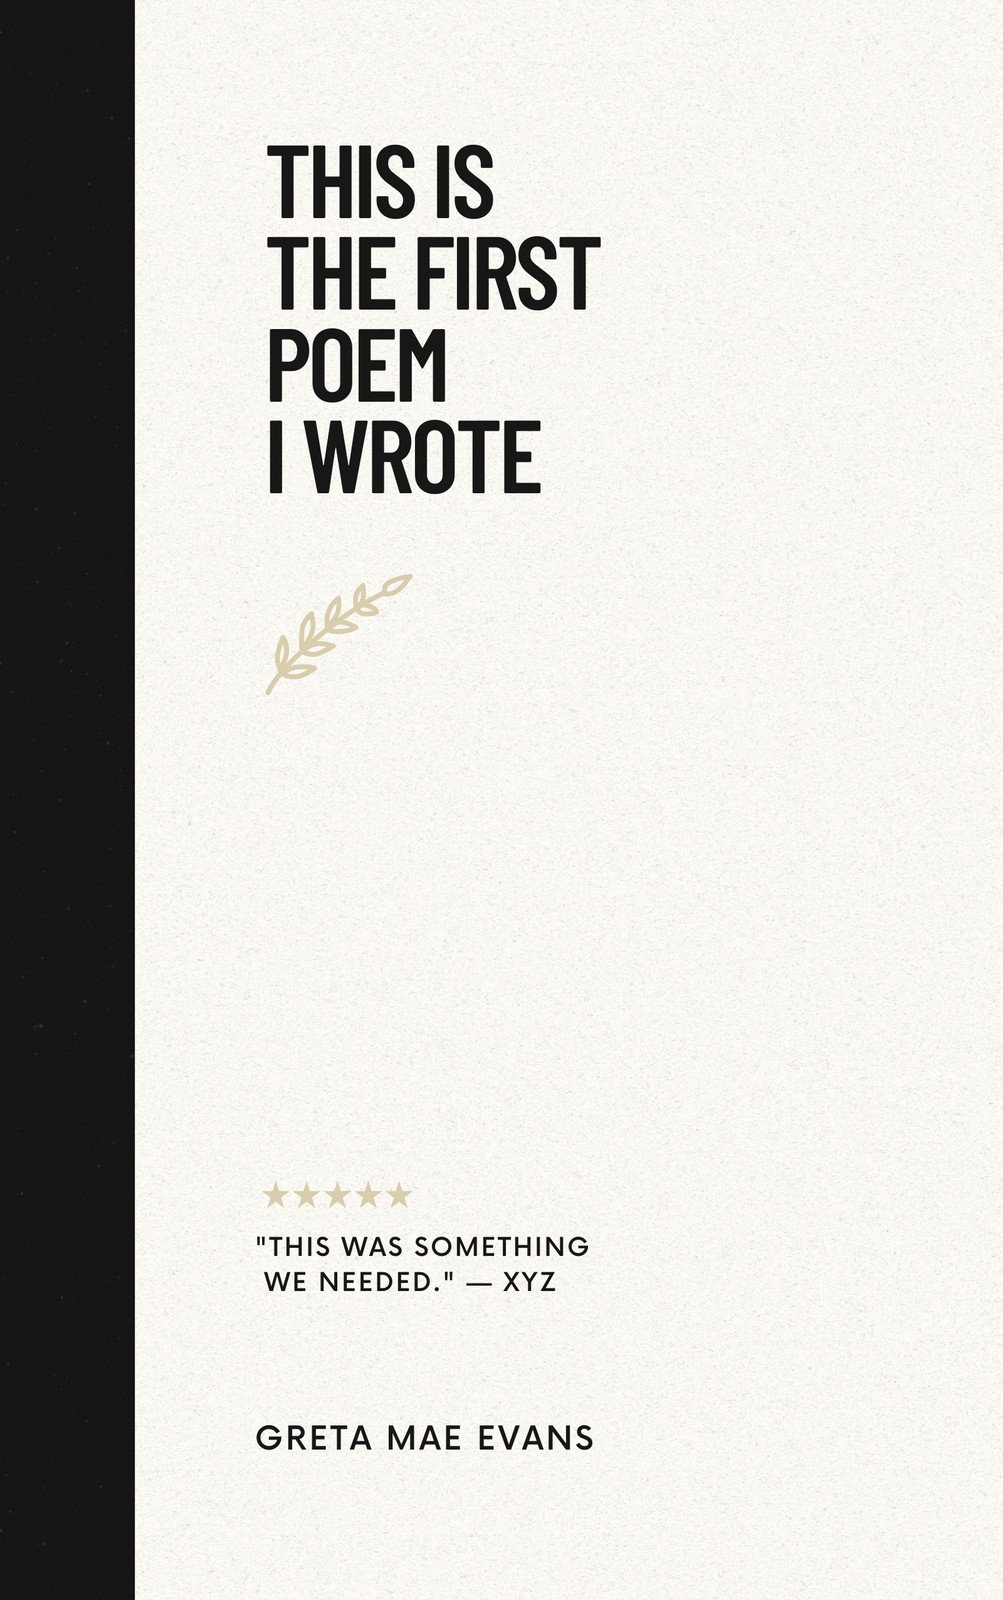 Free and customizable poem templates